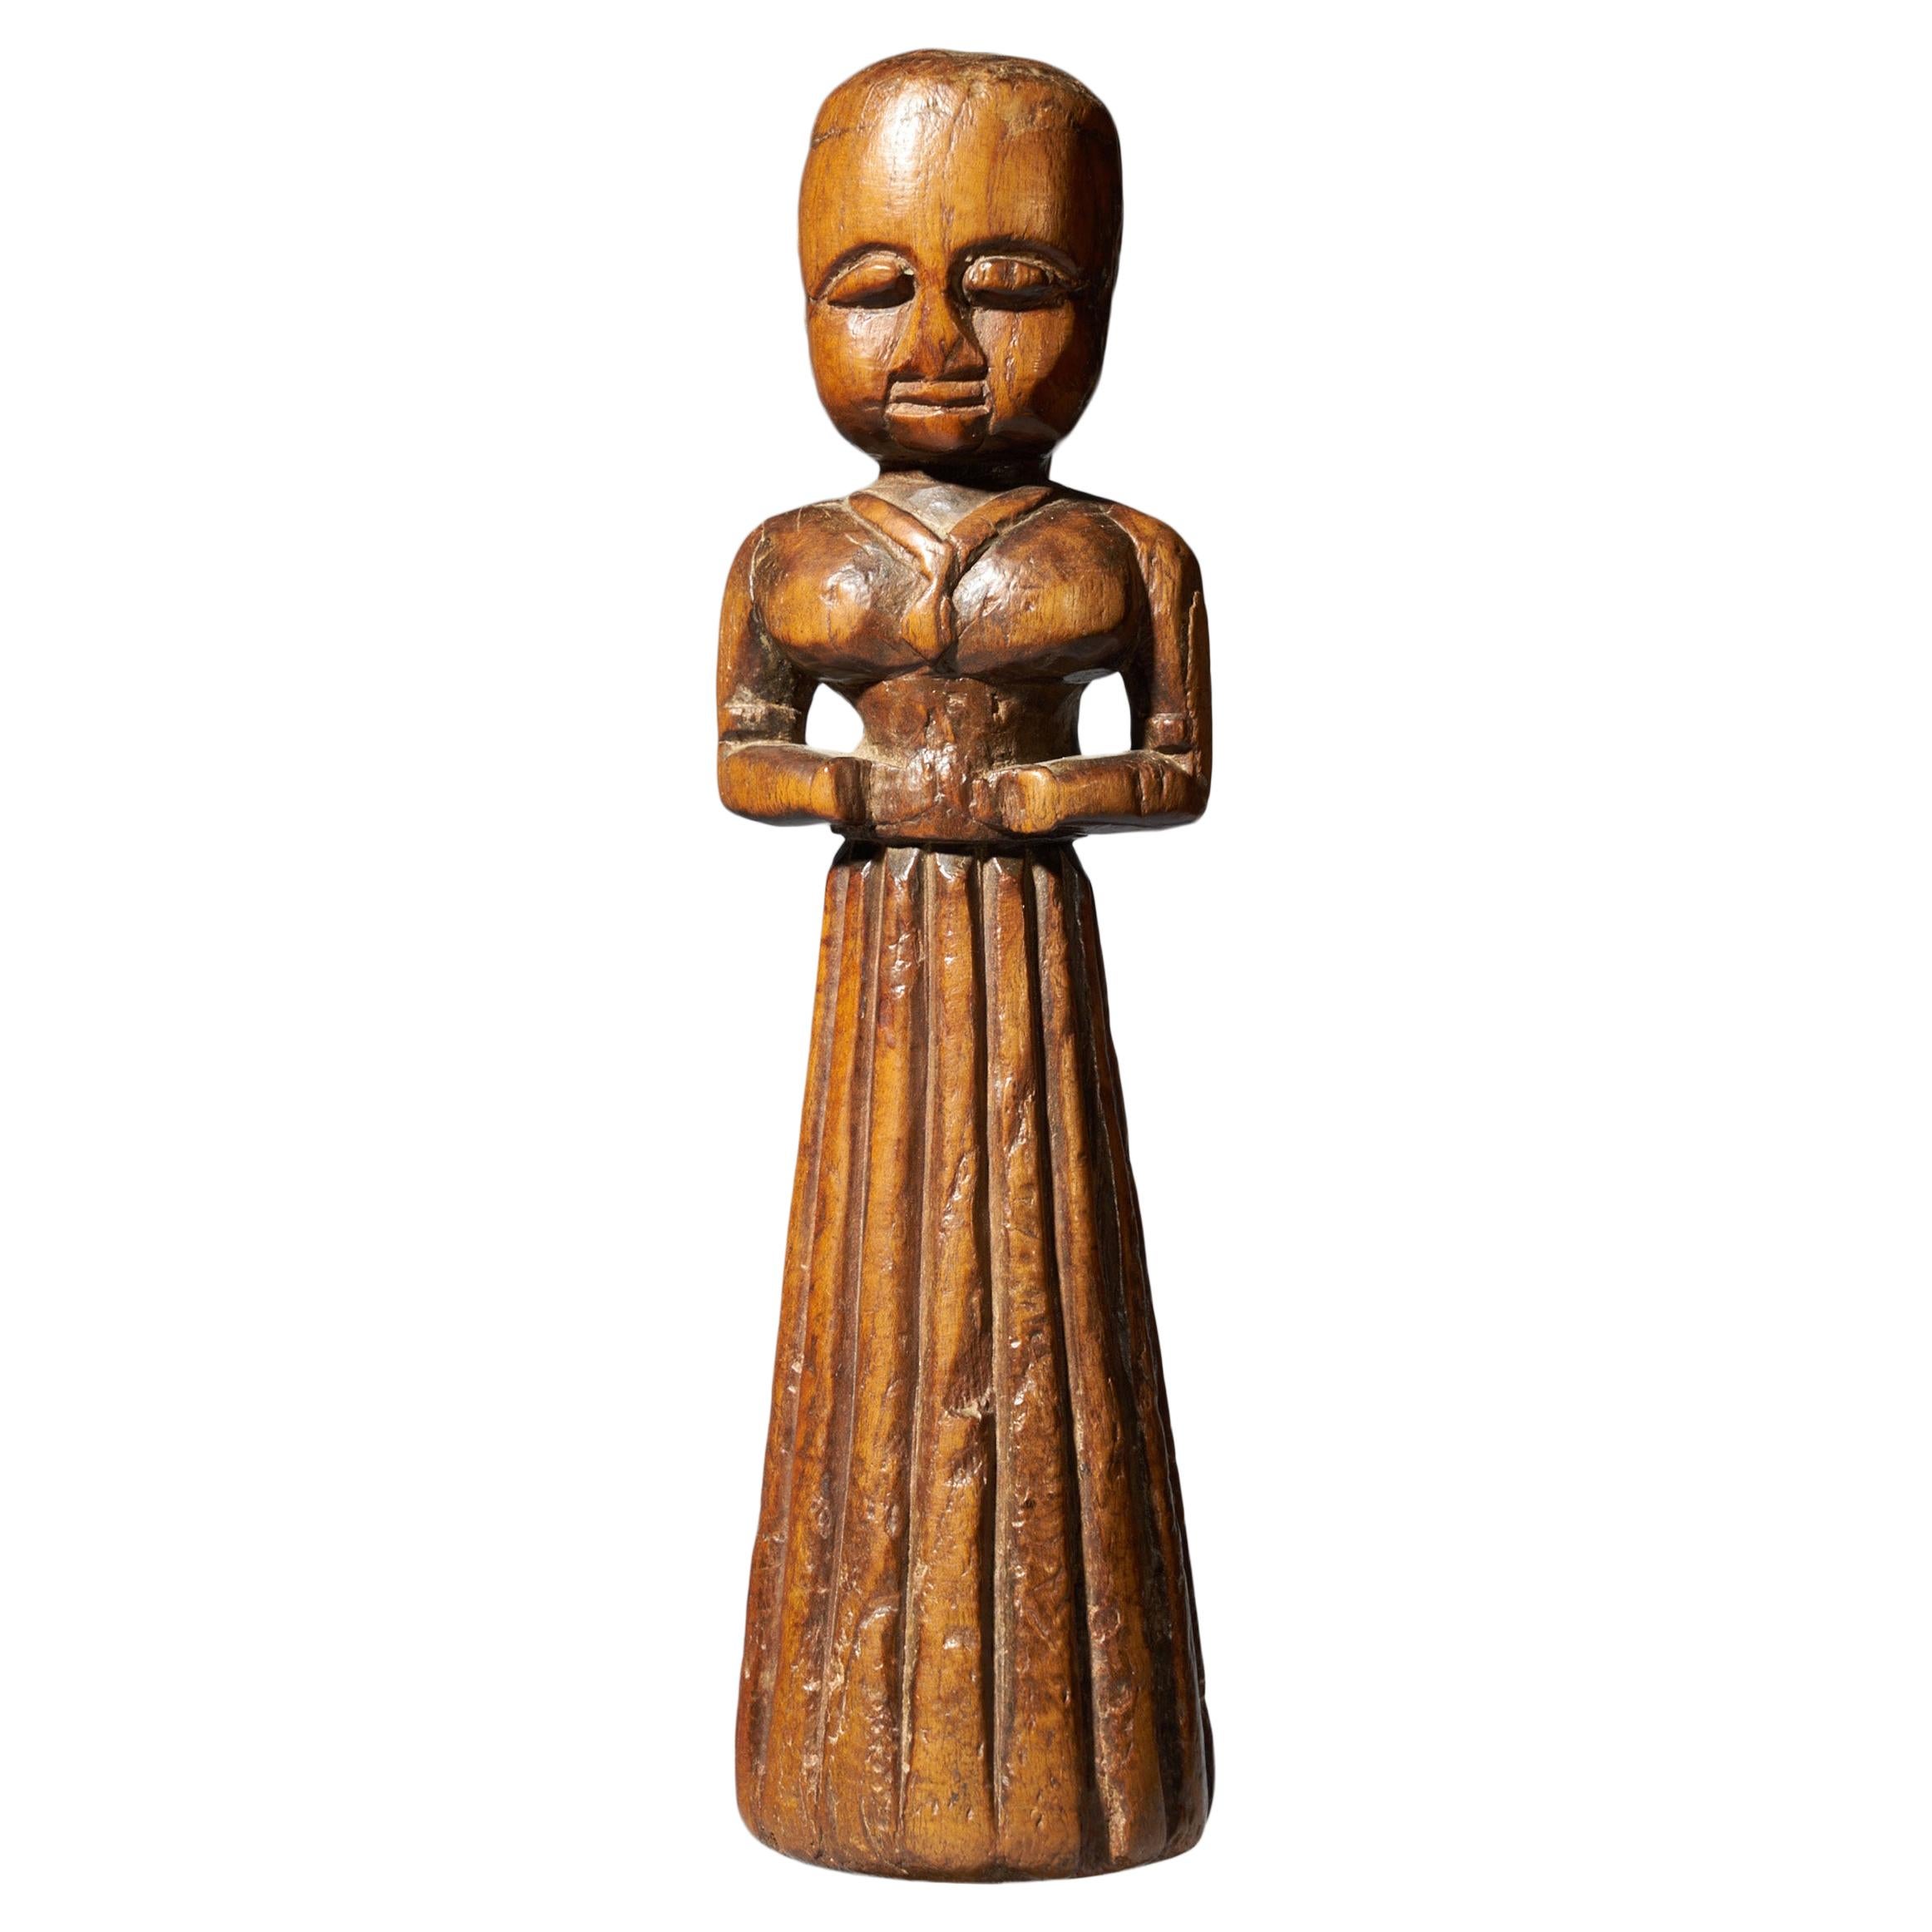 Gujurat Region, North India, Statue of a Woman in a Long Skirt For Sale